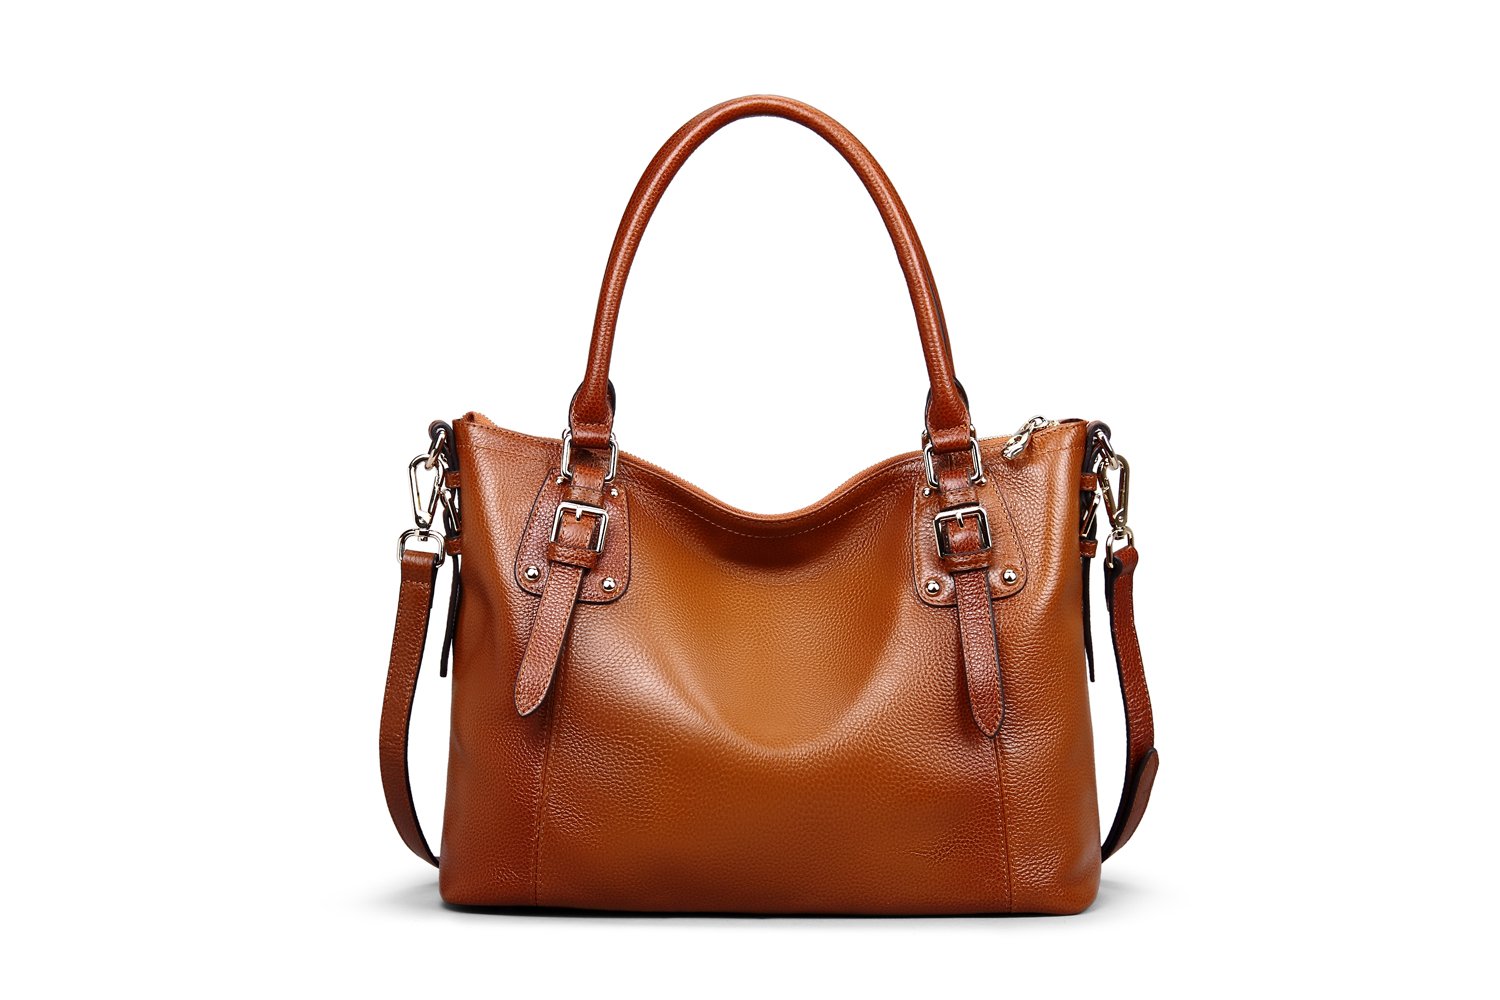  Large Tote Bags for Women Genuine Leather Handbags